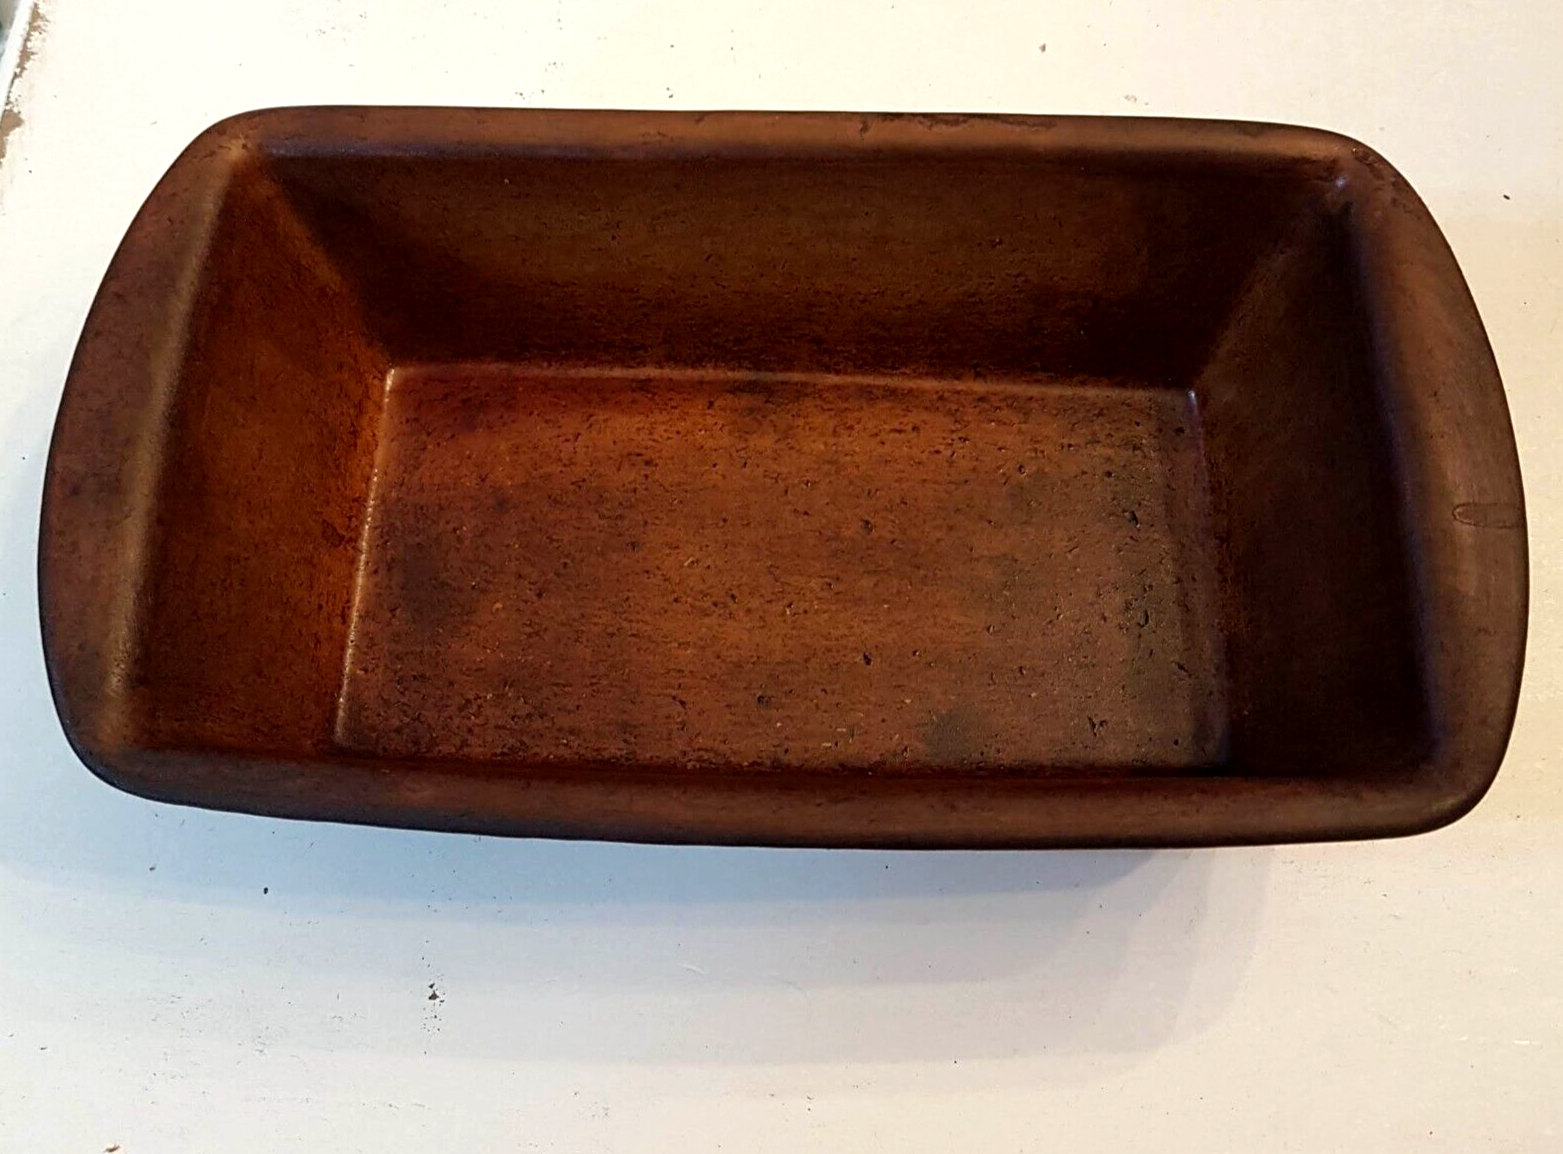 Primary image for Pampered Chef Family Heritage Loaf Pan Seasoned Bread Baking Stone